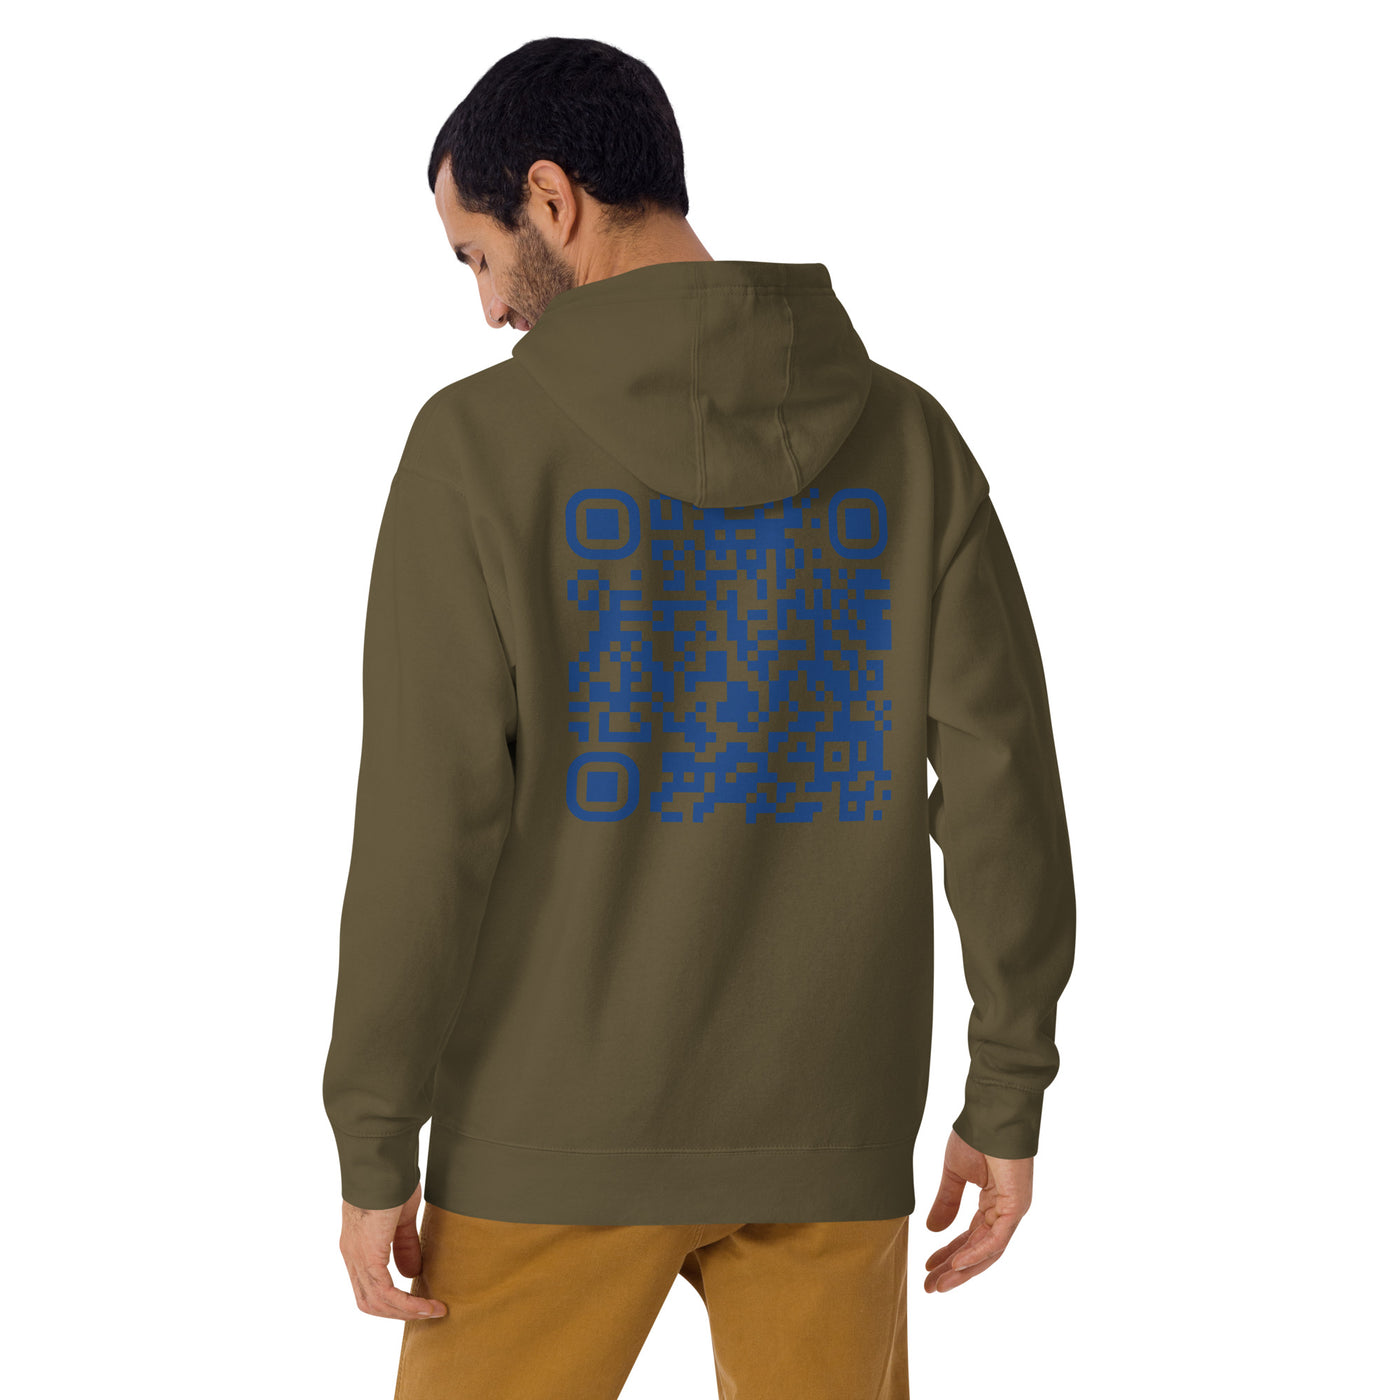 Who's the New Kid, Hacker, Developer, Gamer, Crypto King (No Logo) - Unisex Hoodie Personalized QR Code